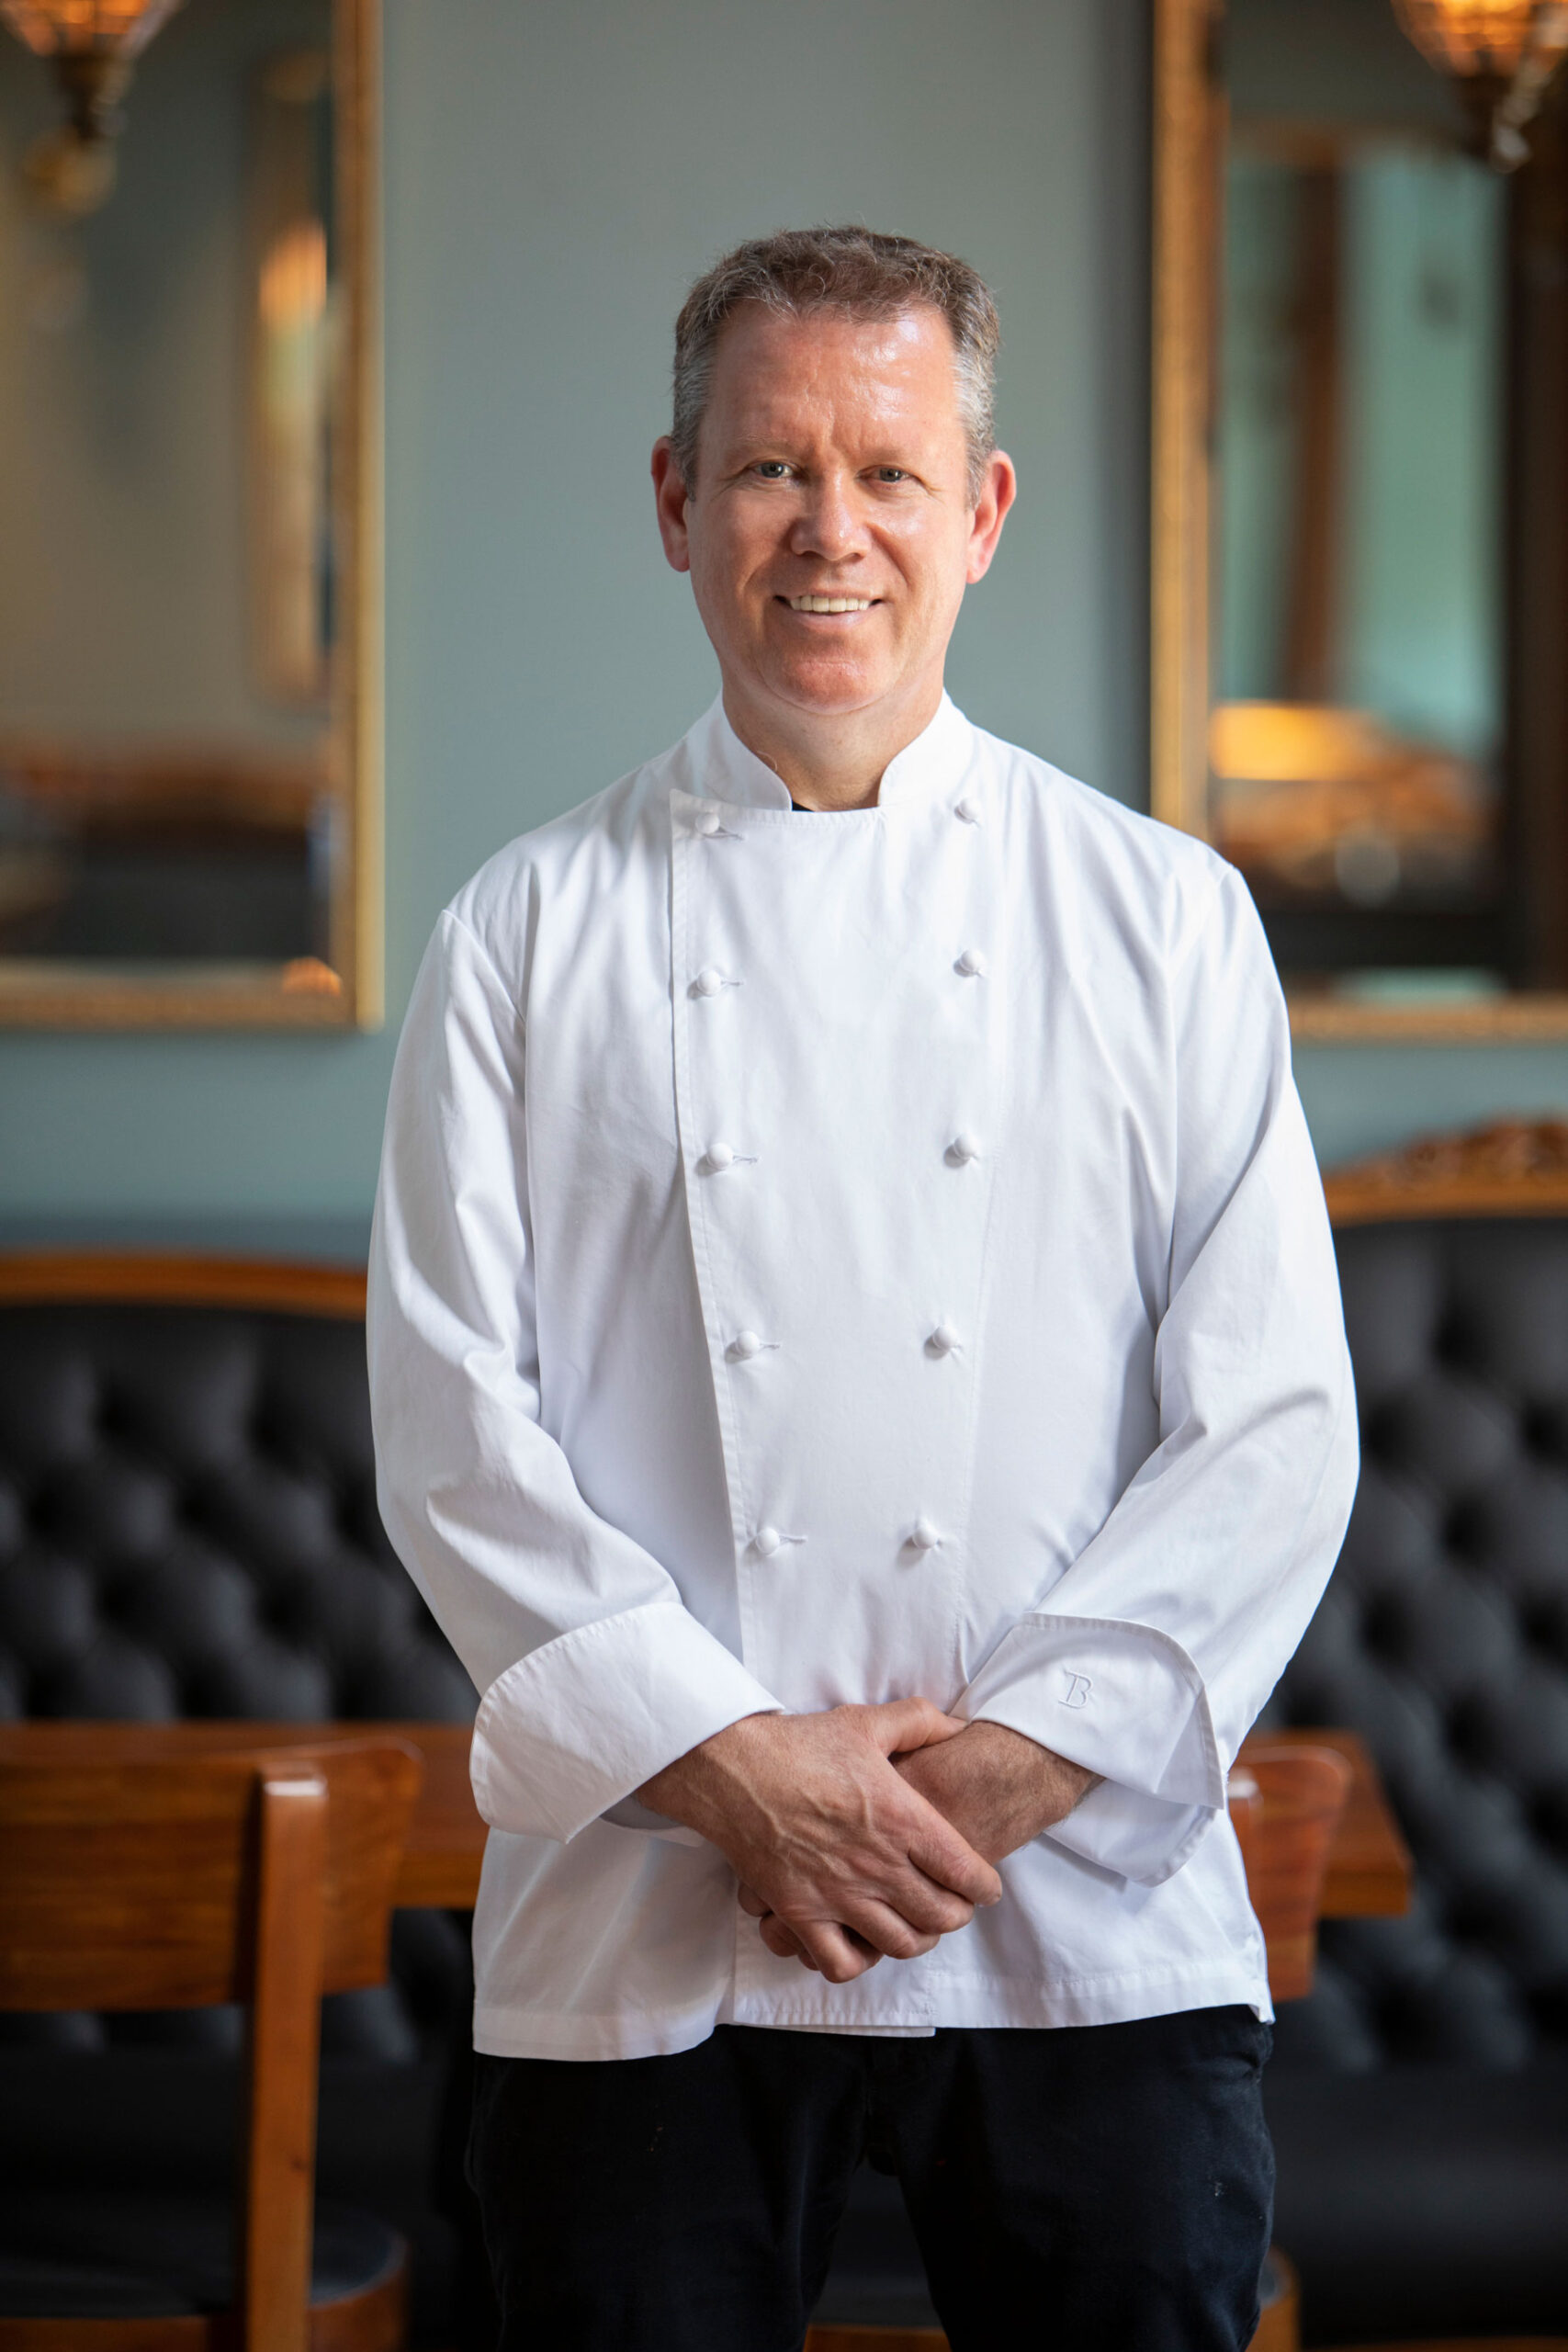 chef walter manzke in chef whites posing in the dining room